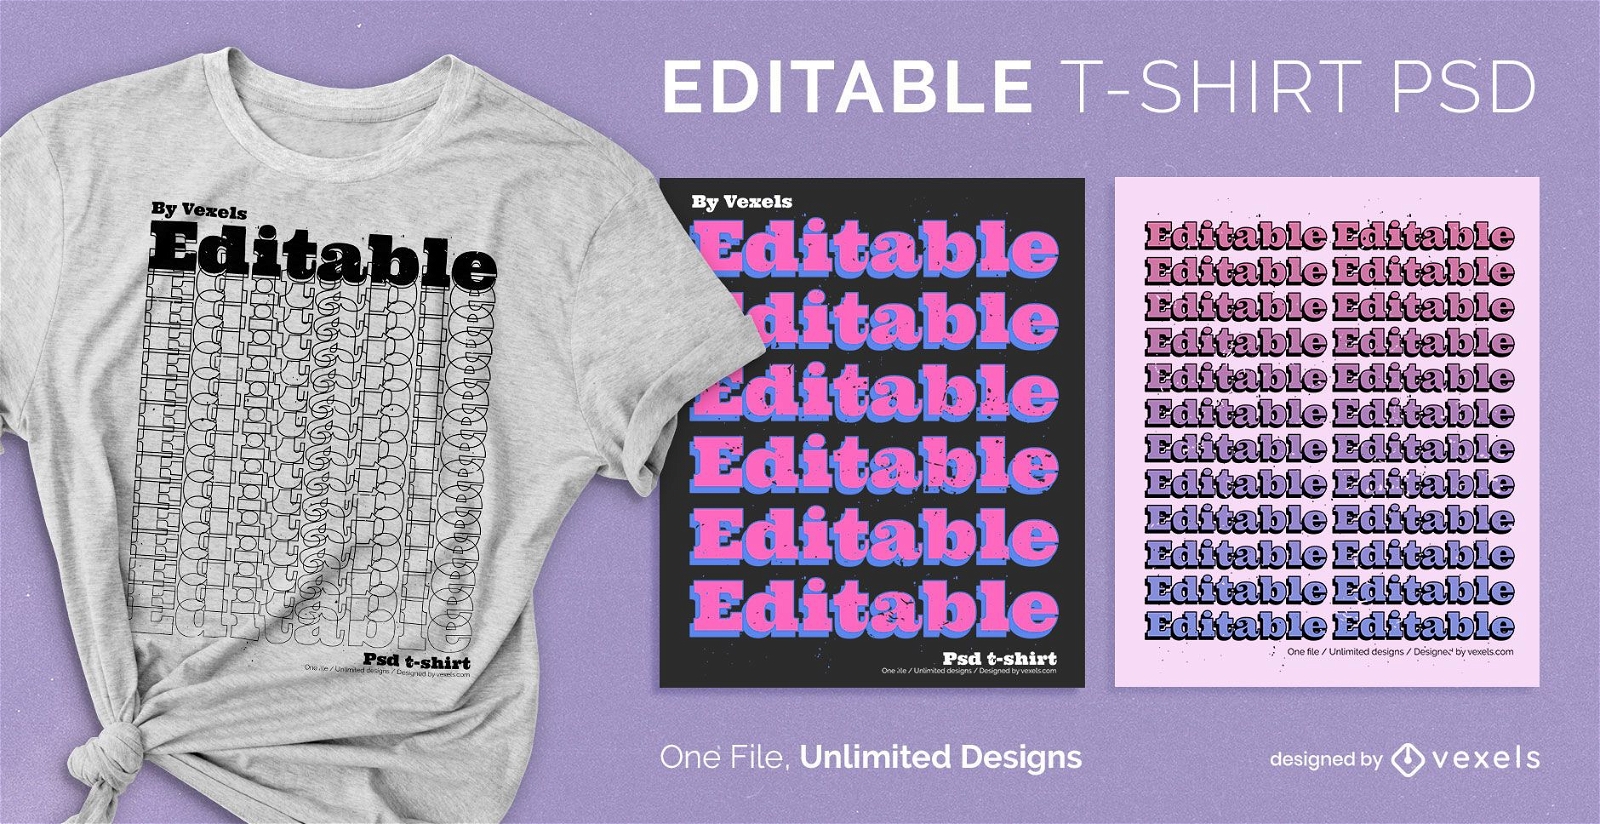 Repetition text scalable t-shirt psd